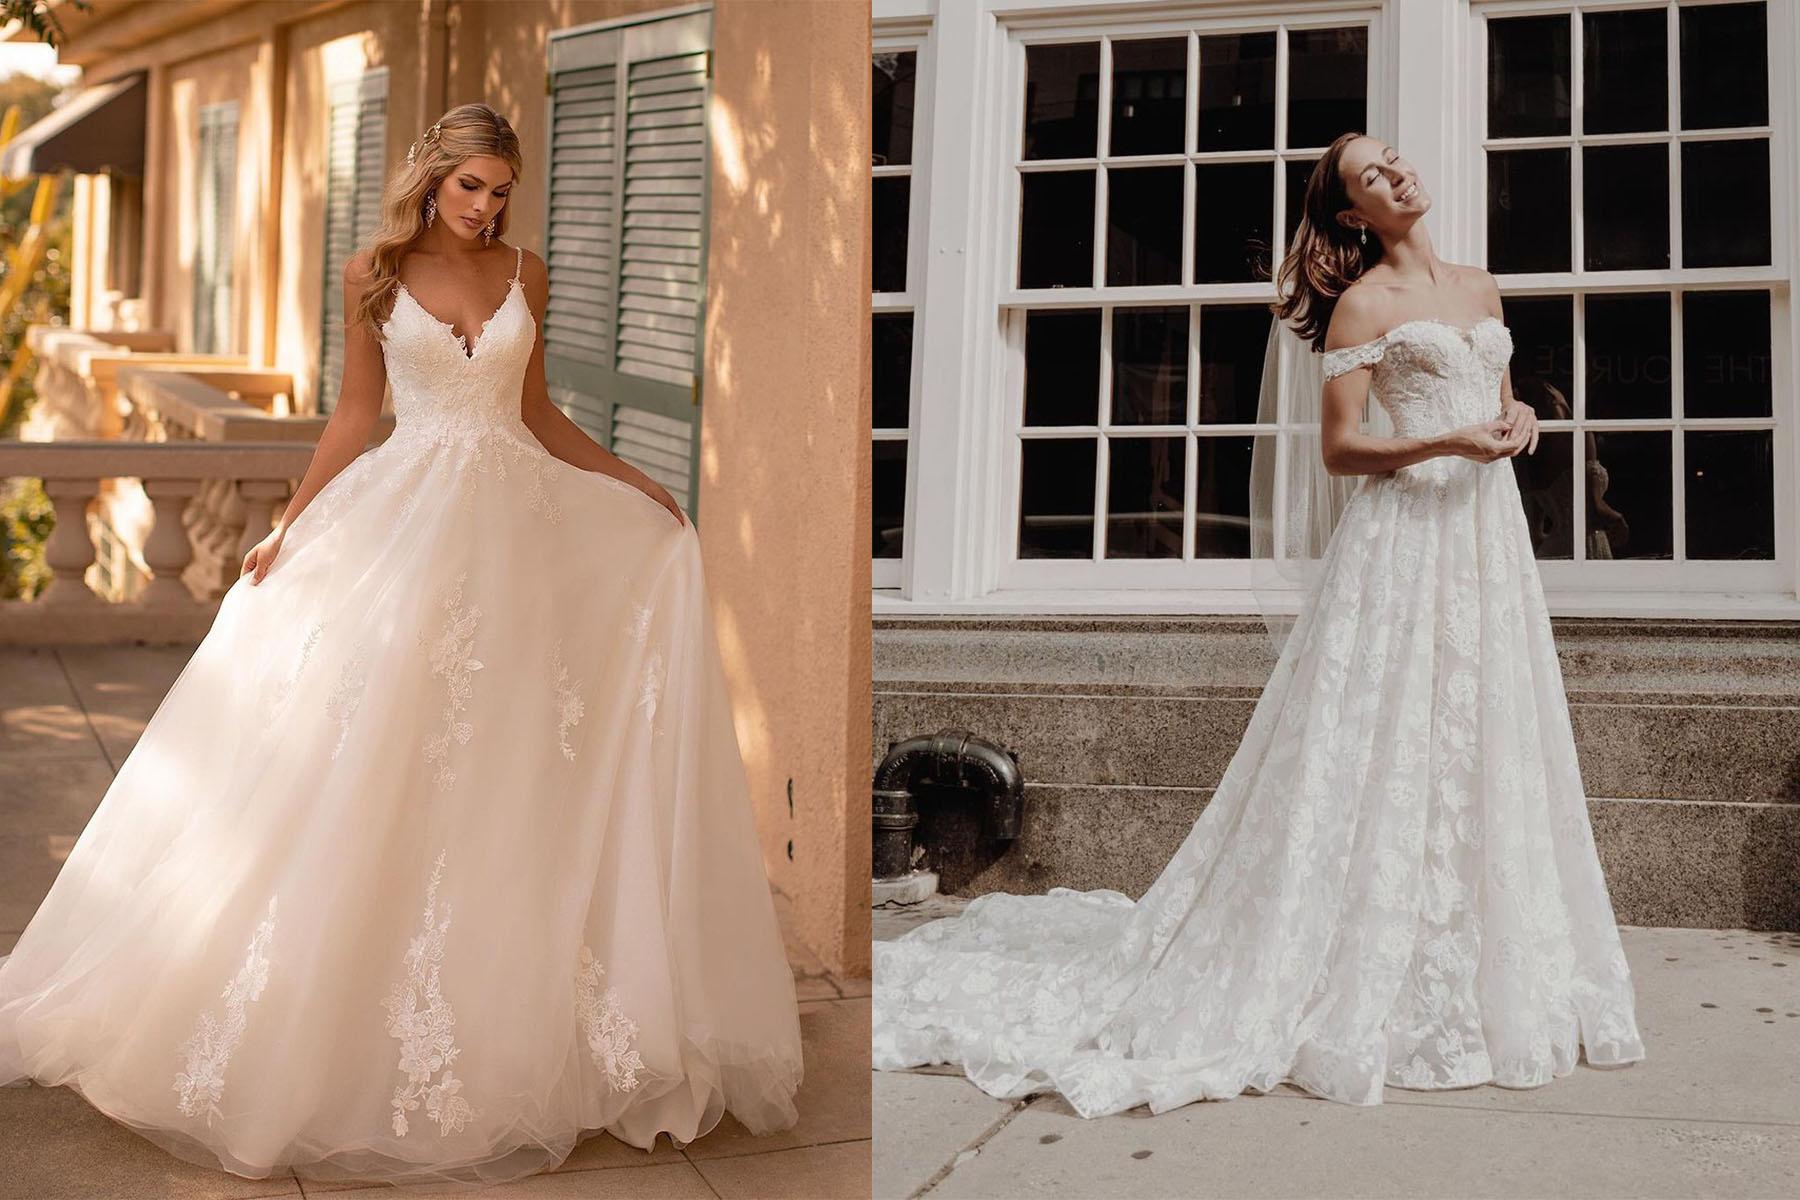 Black Owned Bridal Shop - Wedding Dresses and Gowns London